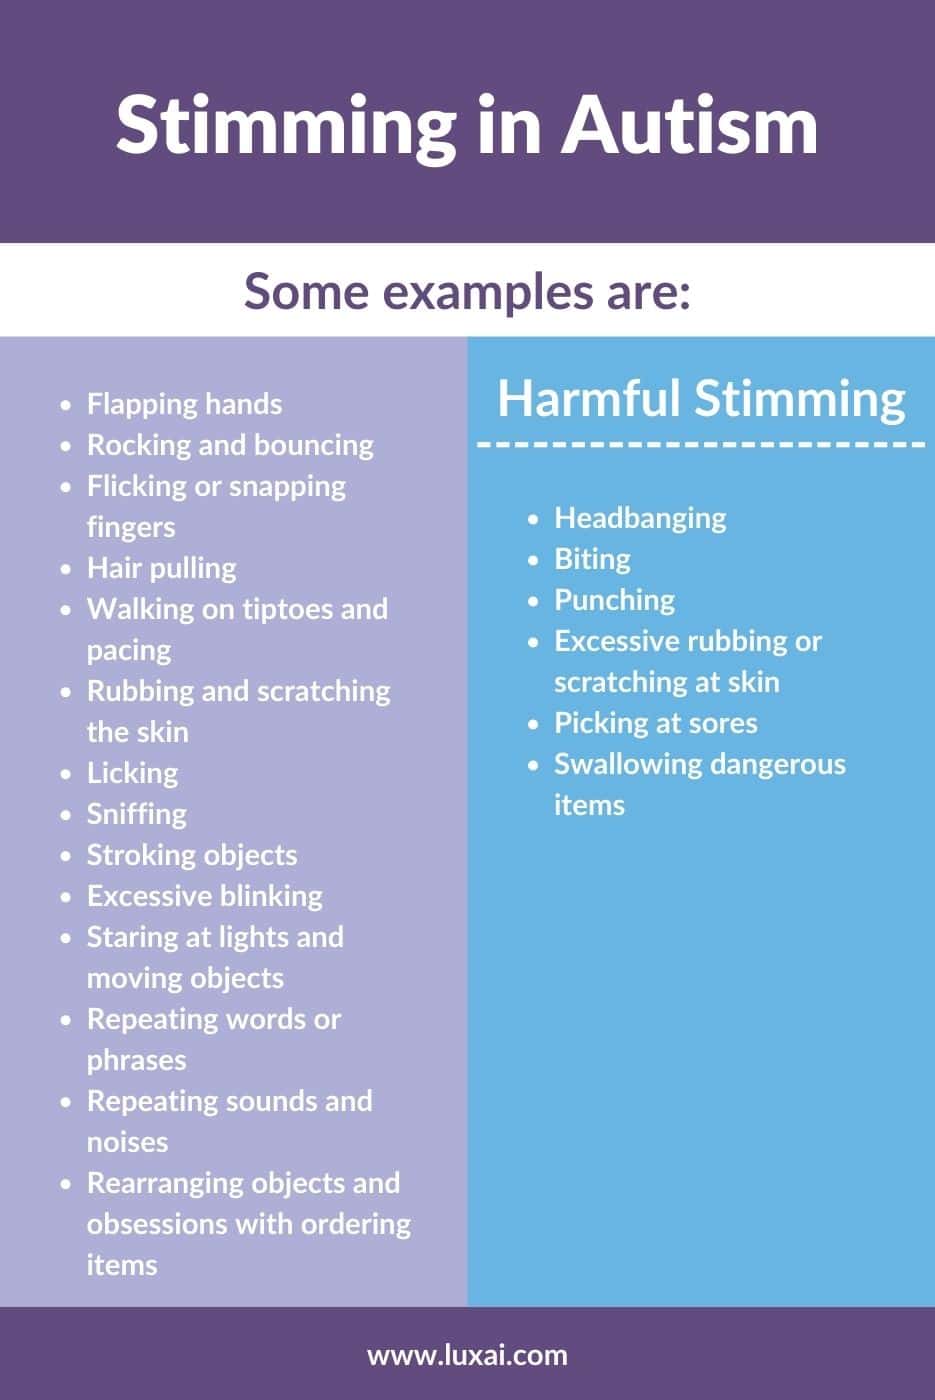 Examples of stimming behaviours are:  -	Flapping hands -	Rocking and bouncing -	Flicking or snapping fingers -	Hair pulling -	Walking on tiptoes and pacing -	Rubbing and scratching the skin  -	Licking -	Sniffing -	Stroking objects -	Excessive blinking -	Staring at lights and moving objects -	repeating words or phrases -	Repeating sounds and noises -	rearranging objects and obsessions with ordering items in a curtain pattern